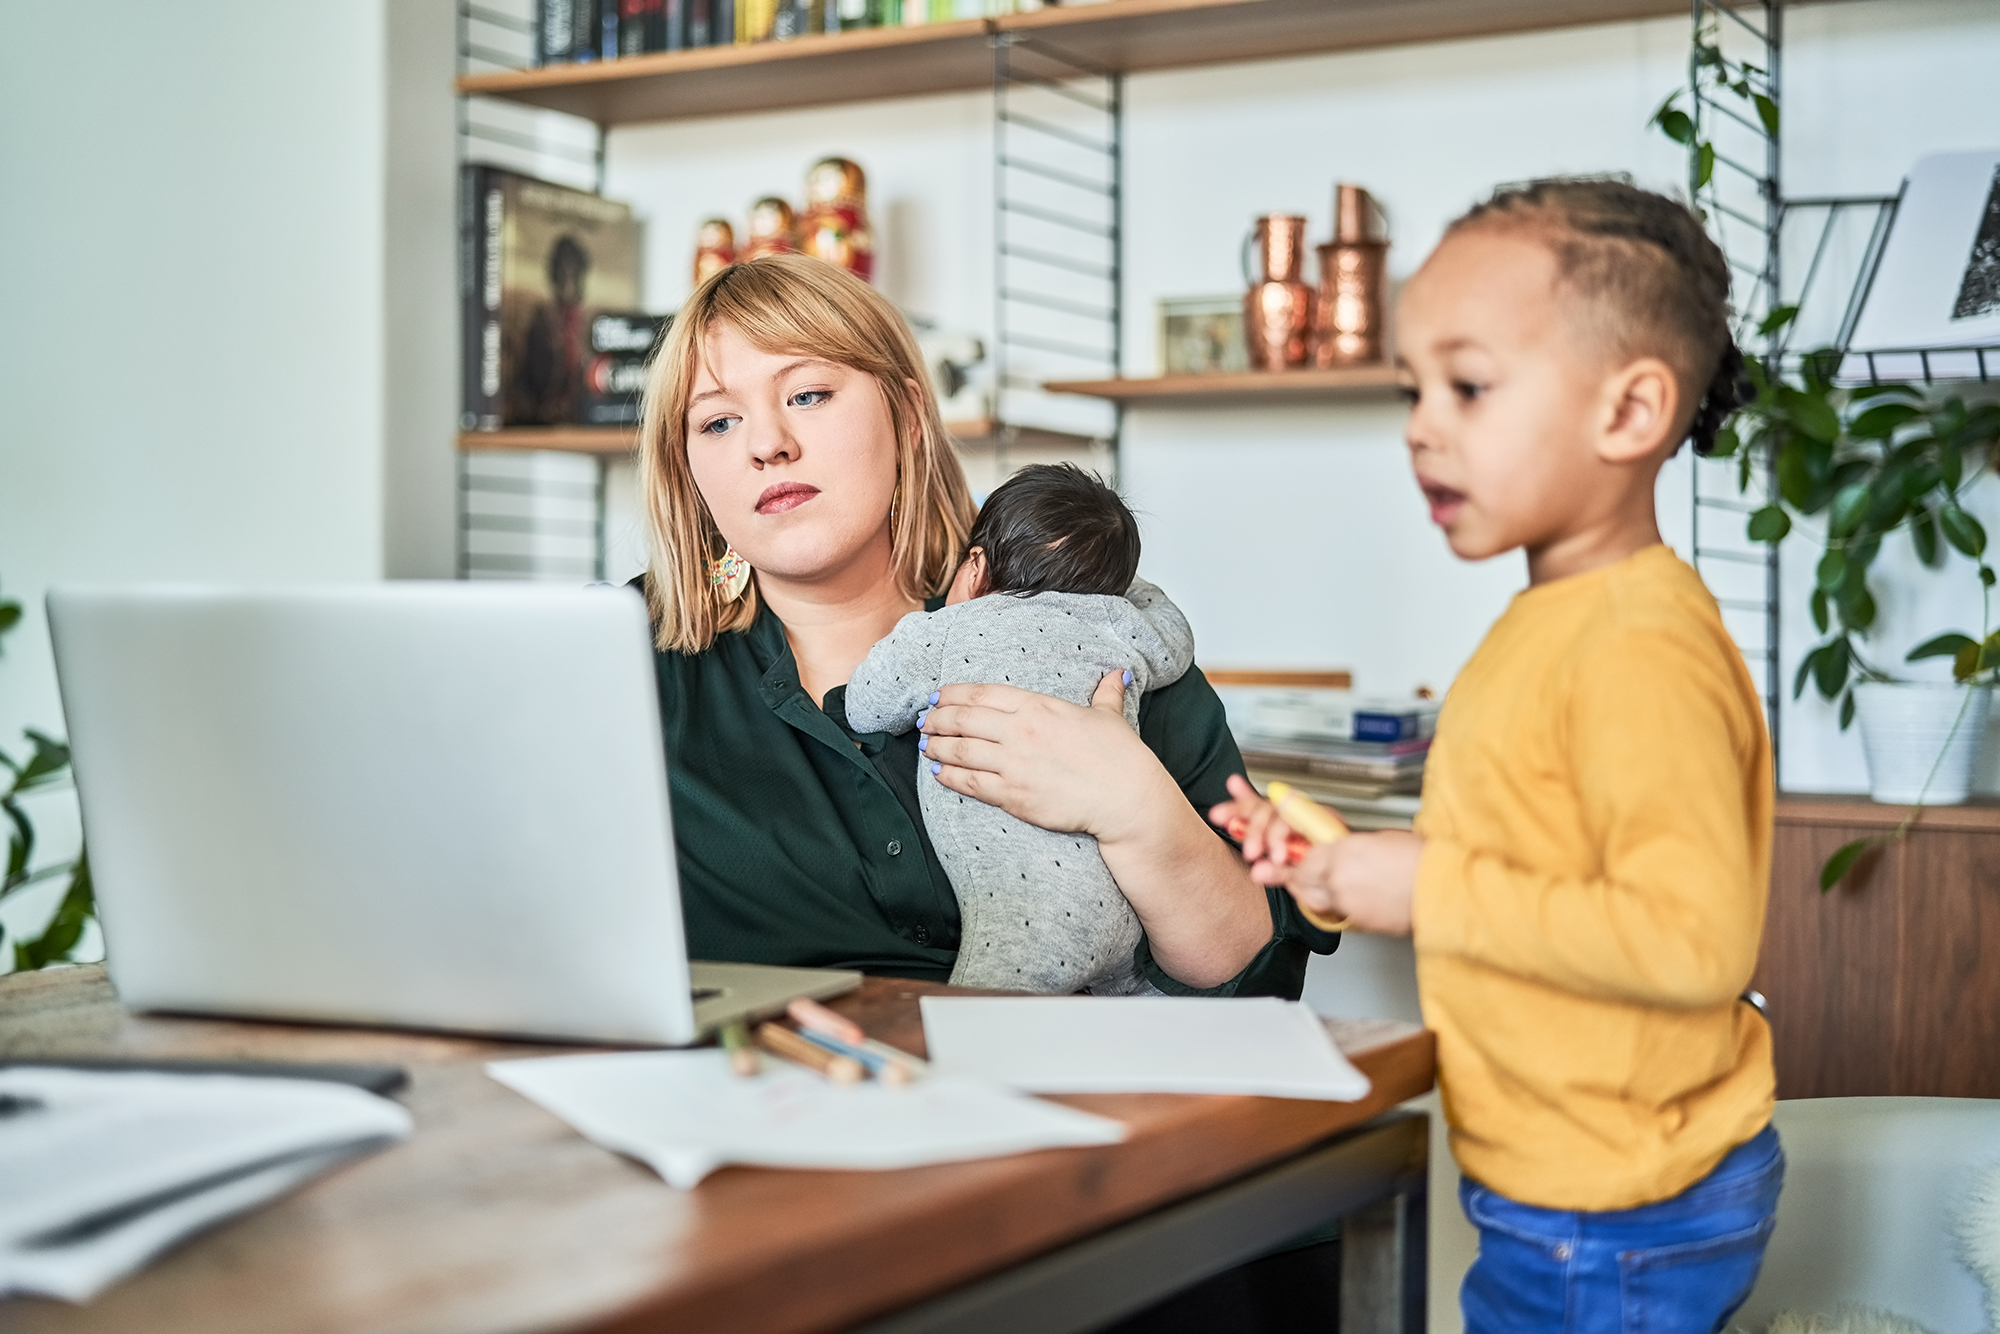 Image of mother working at computer with two children at her side